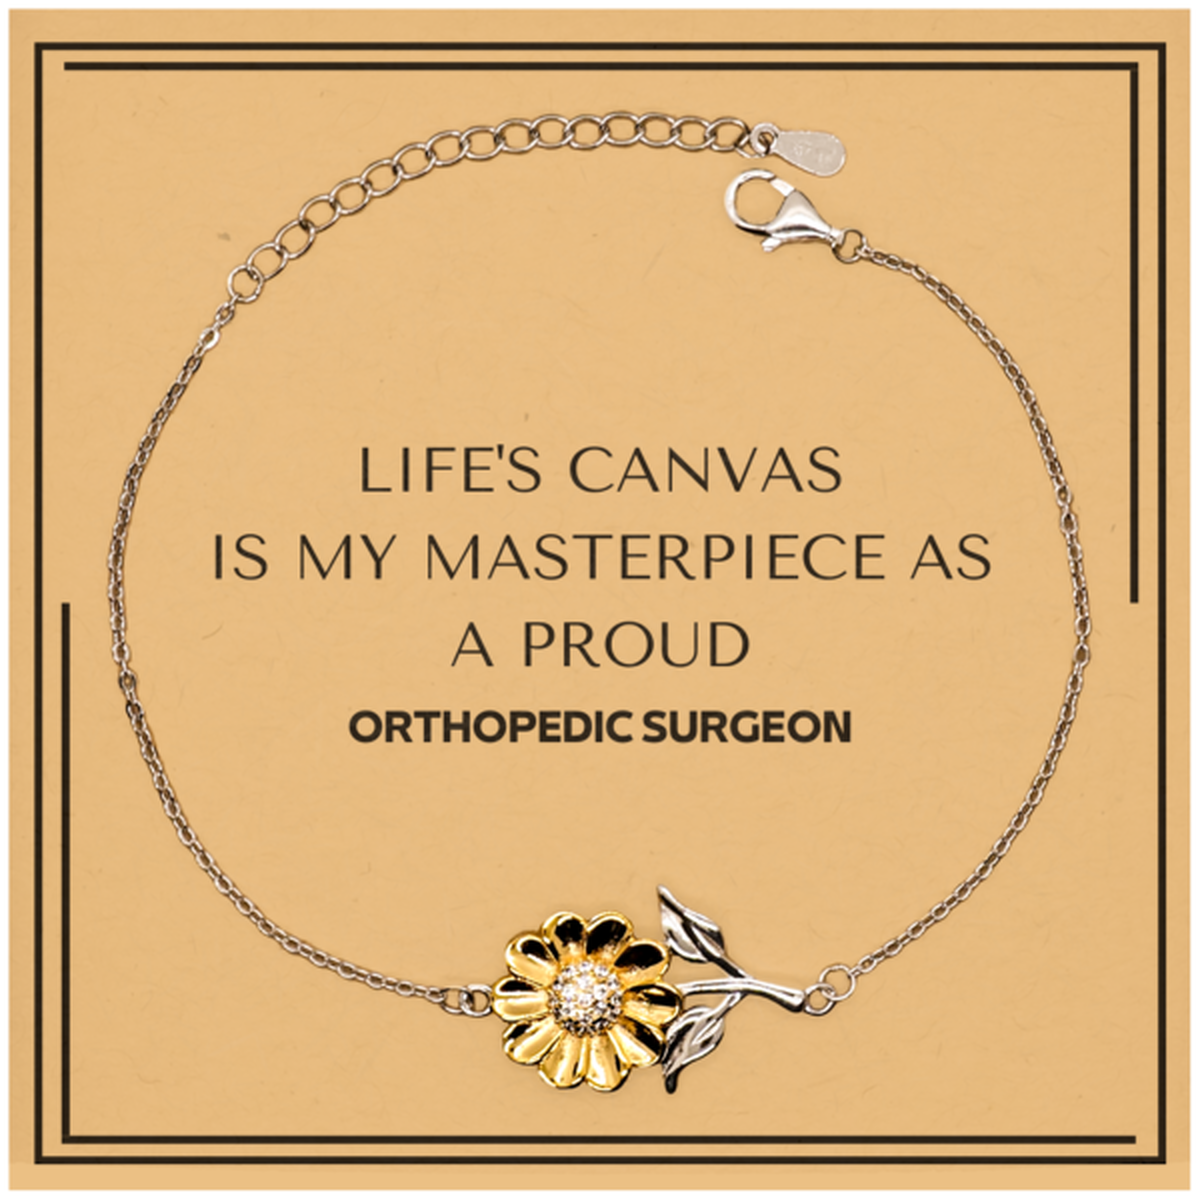 Proud Orthopedic Surgeon Gifts, Life's canvas is my masterpiece, Epic Birthday Christmas Unique Sunflower Bracelet For Orthopedic Surgeon, Coworkers, Men, Women, Friends